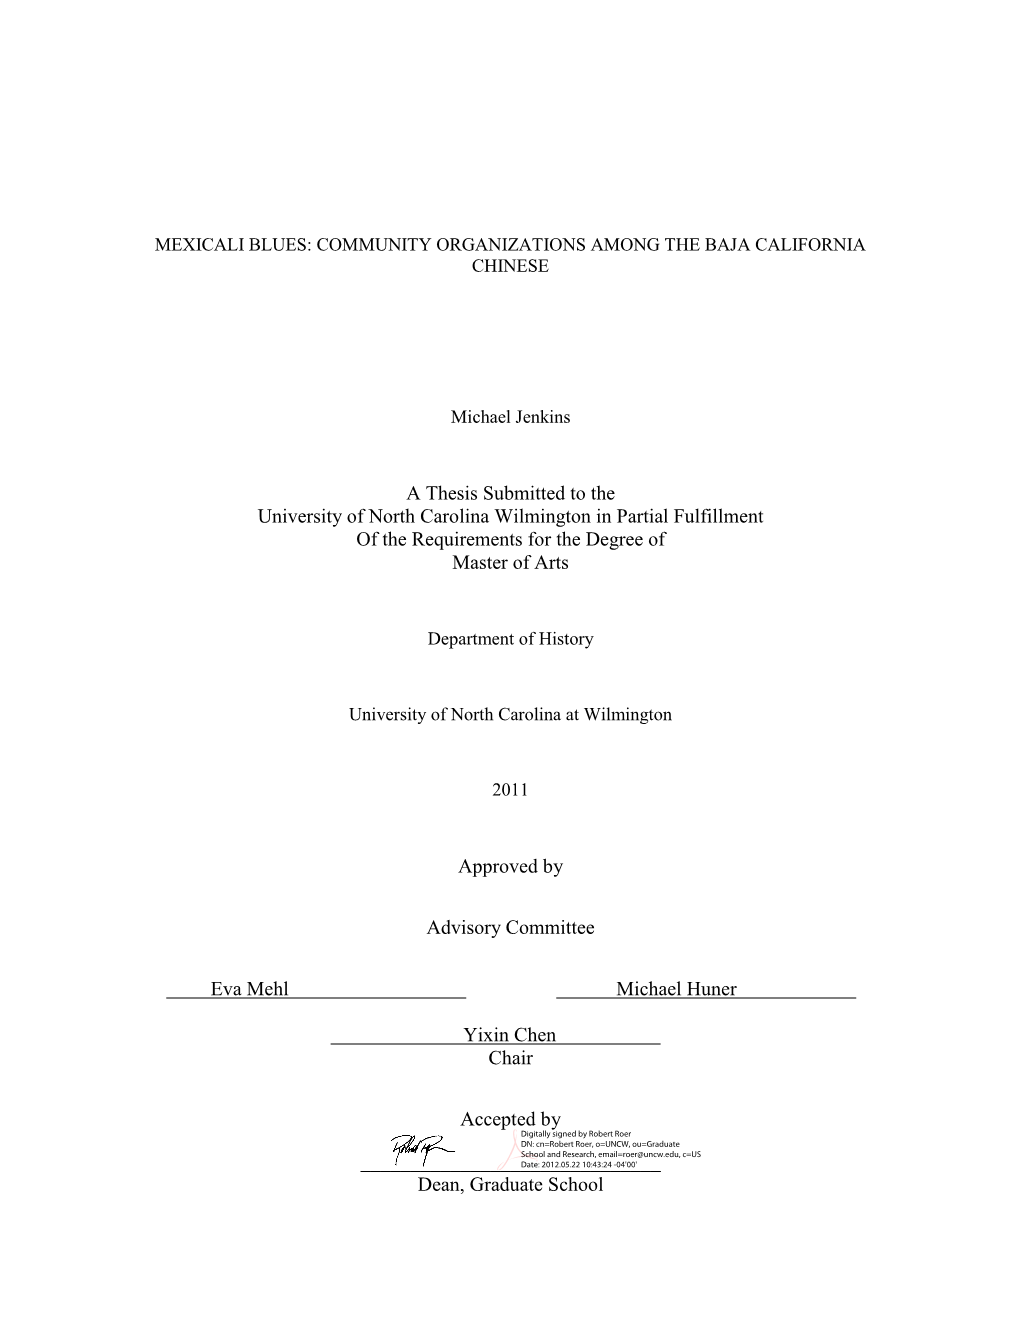 A Thesis Submitted to the University of North Carolina Wilmington in Partial Fulfillment of the Requirements for the Degree of Master of Arts